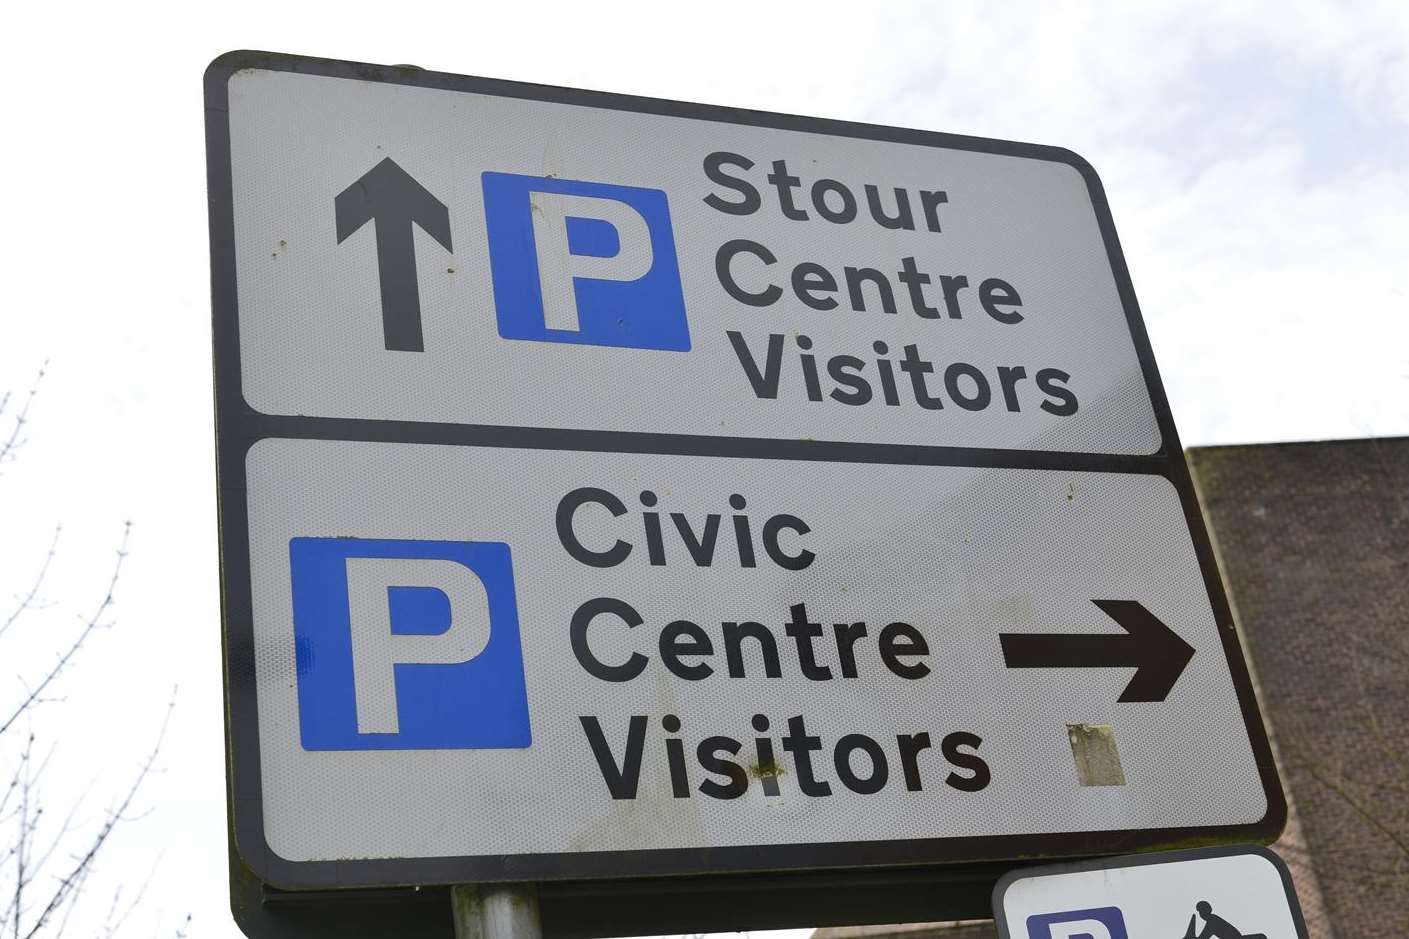 The Stour Centre hopes to reopen tomorrow after week-long closure